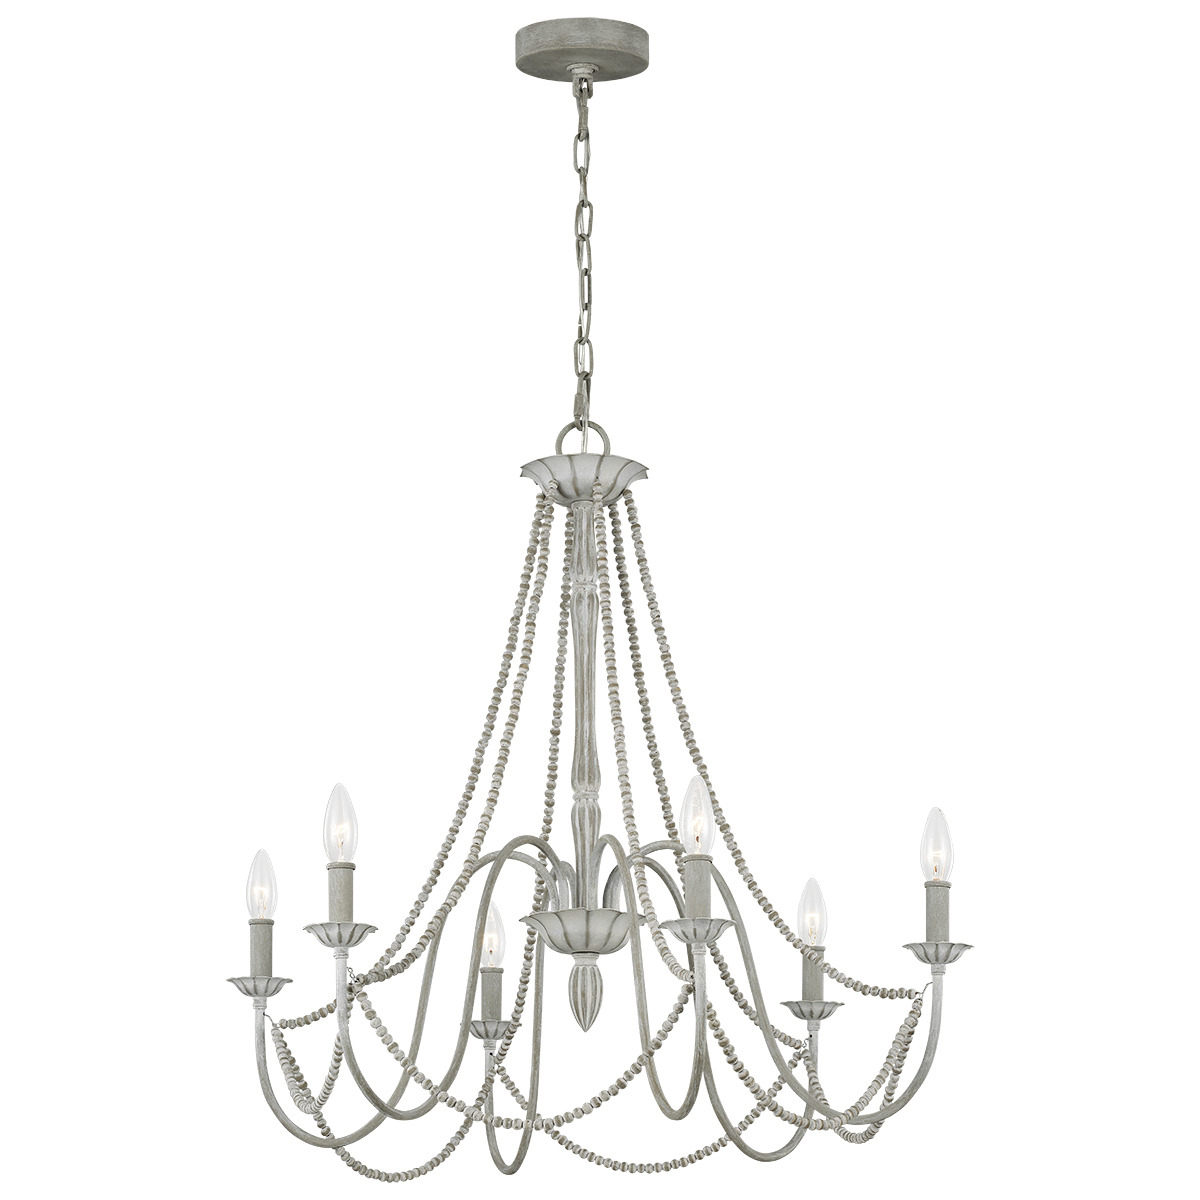 Elstead FE-MARYVILLE6 Maryville 6 Light Traditional Ceiling Chandelier In Washed Grey Finish